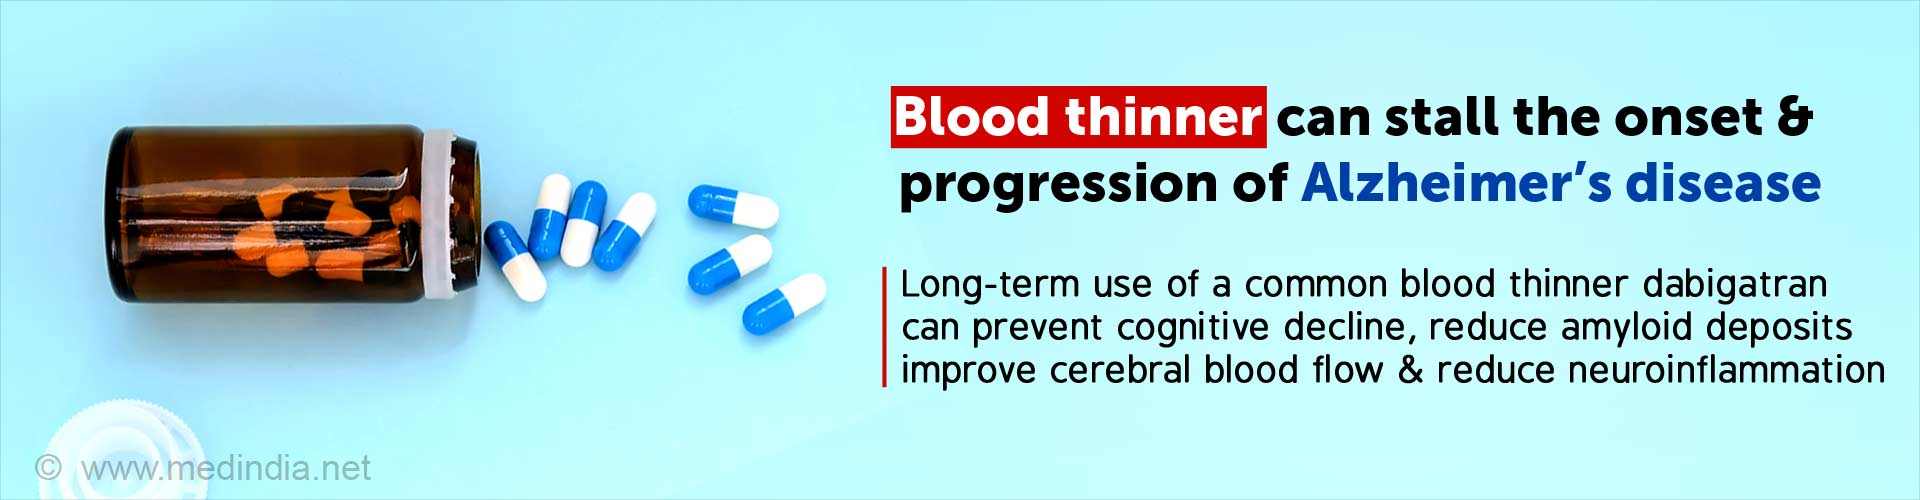 Blood thinner can stall the onset & progression of Alzheimer''s disease. Long-term use of a common blood thinner dabigatran can prevent cognitive decline, reduce amyloid deposits, improve cerebral blood flow, and reduce neuroinflammation.